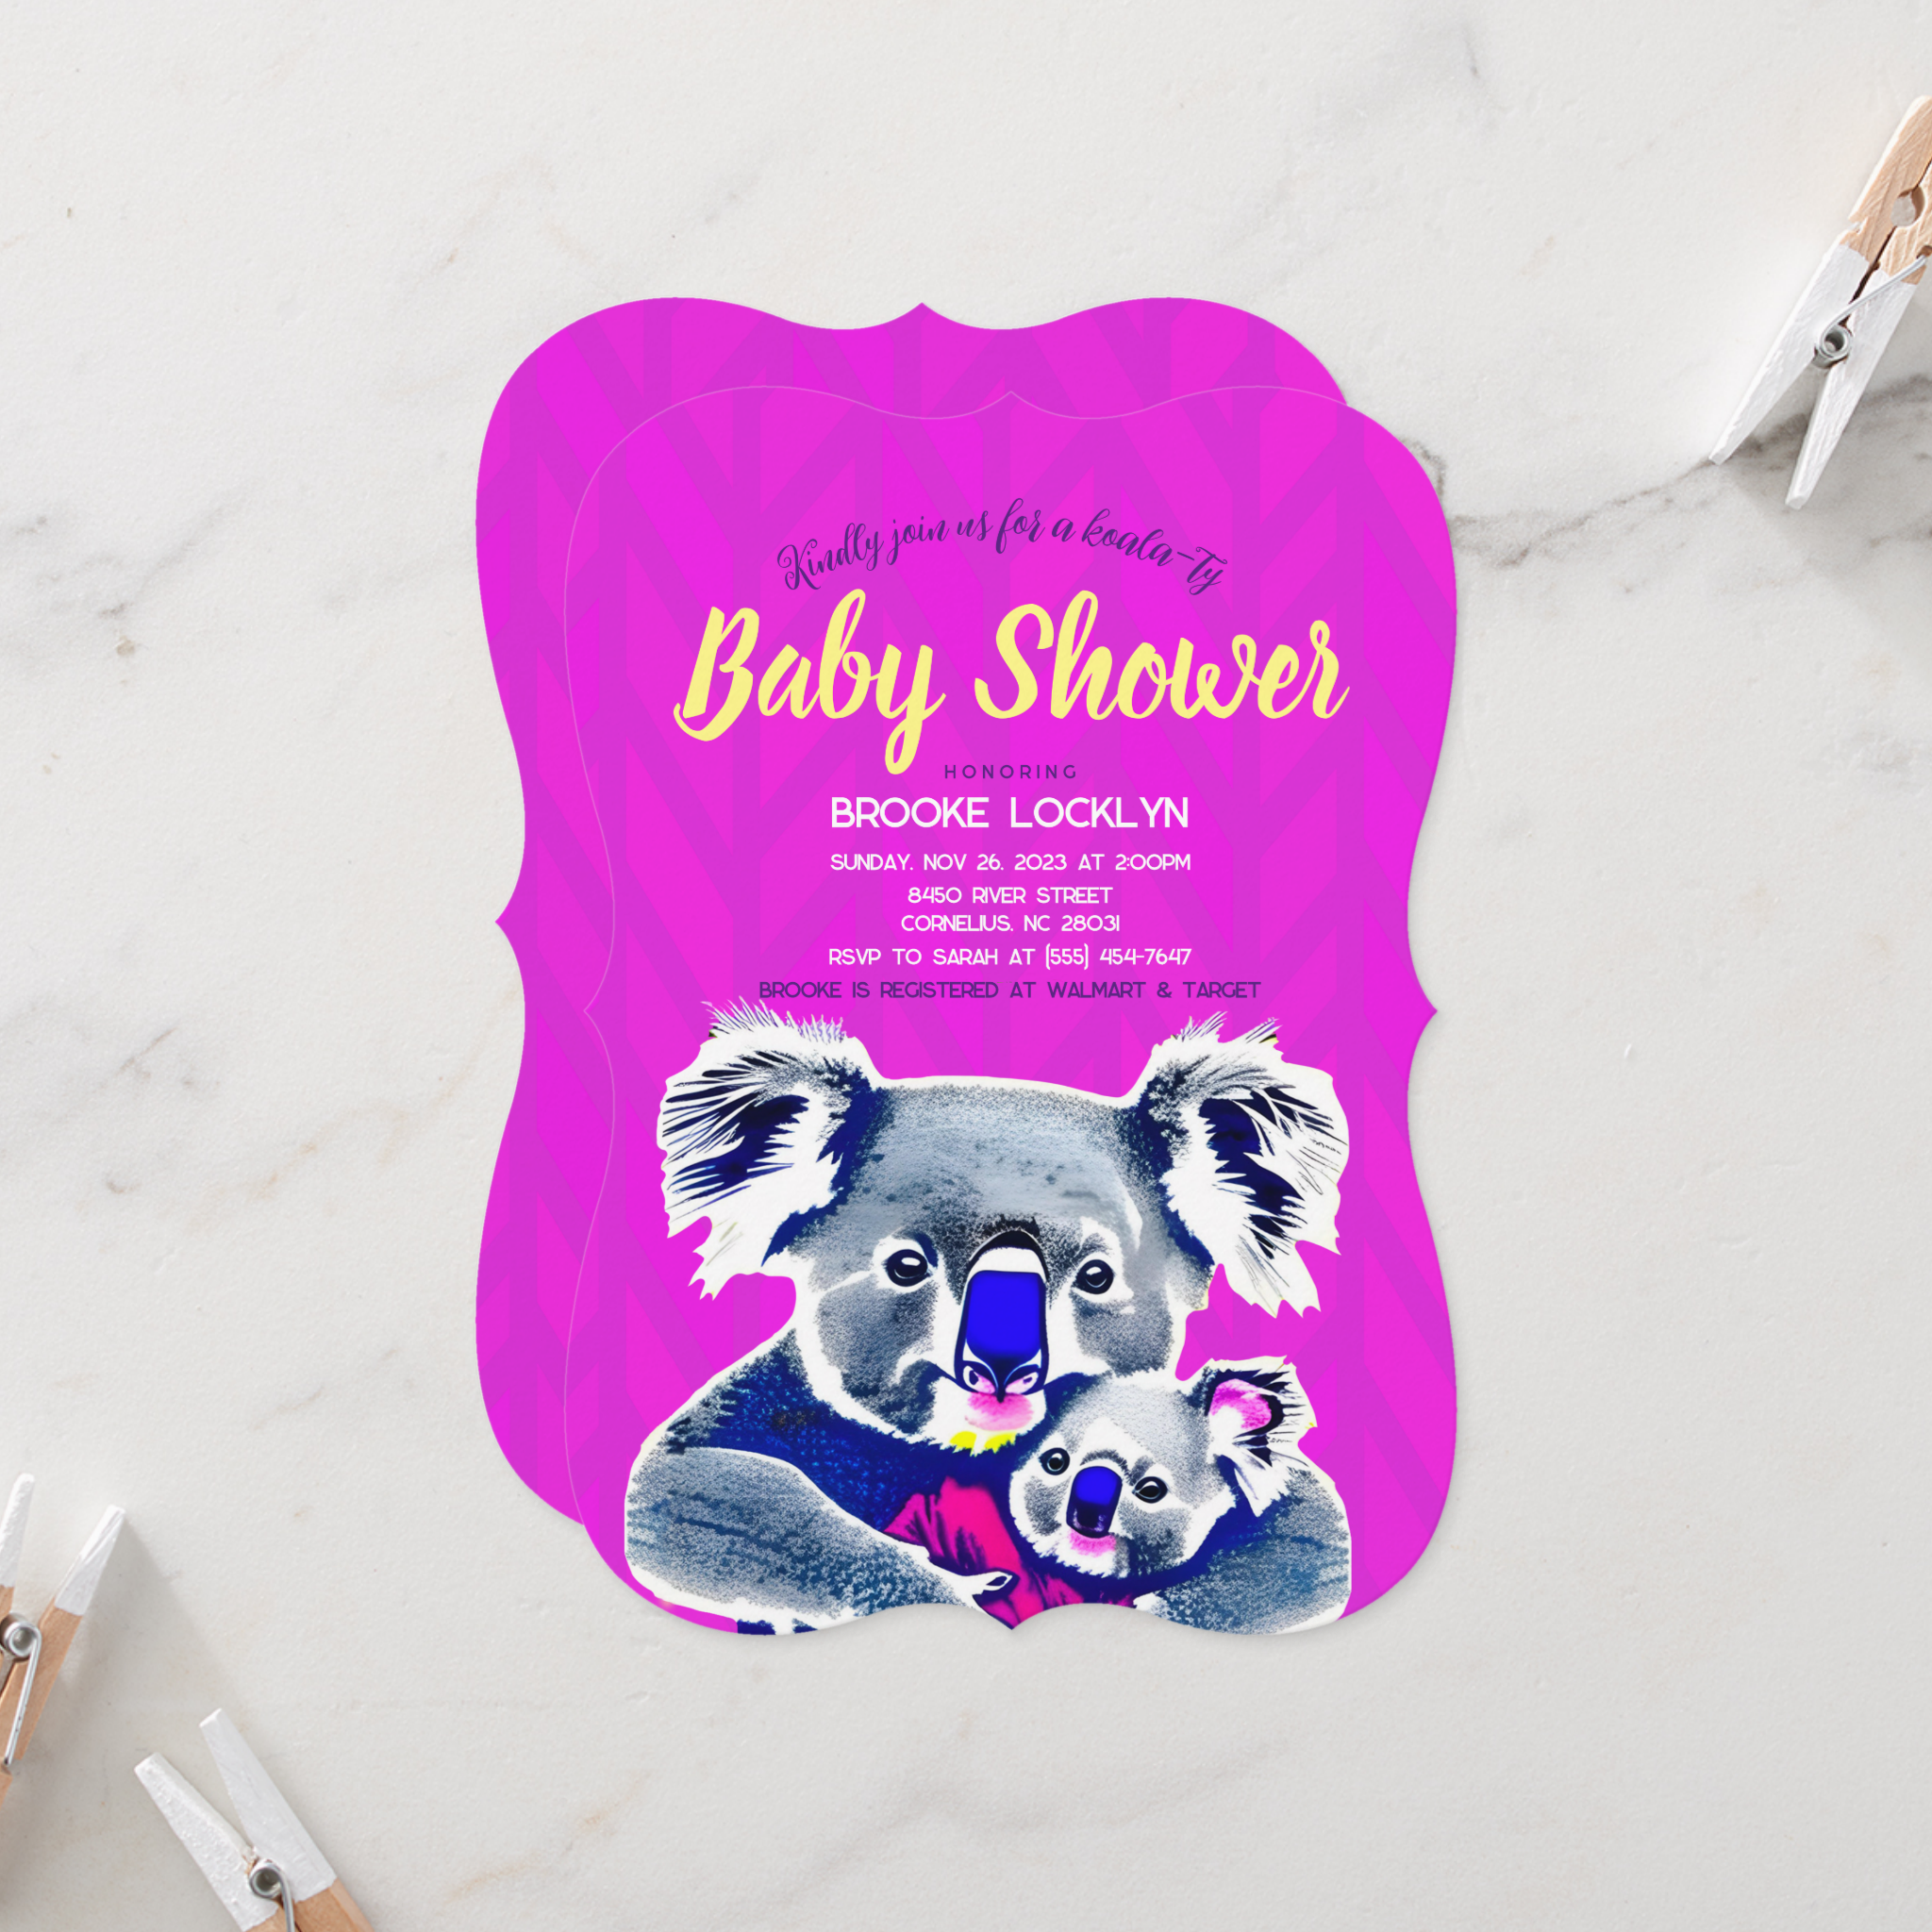 An image of a pink baby shower invitation with a mother and baby koala.